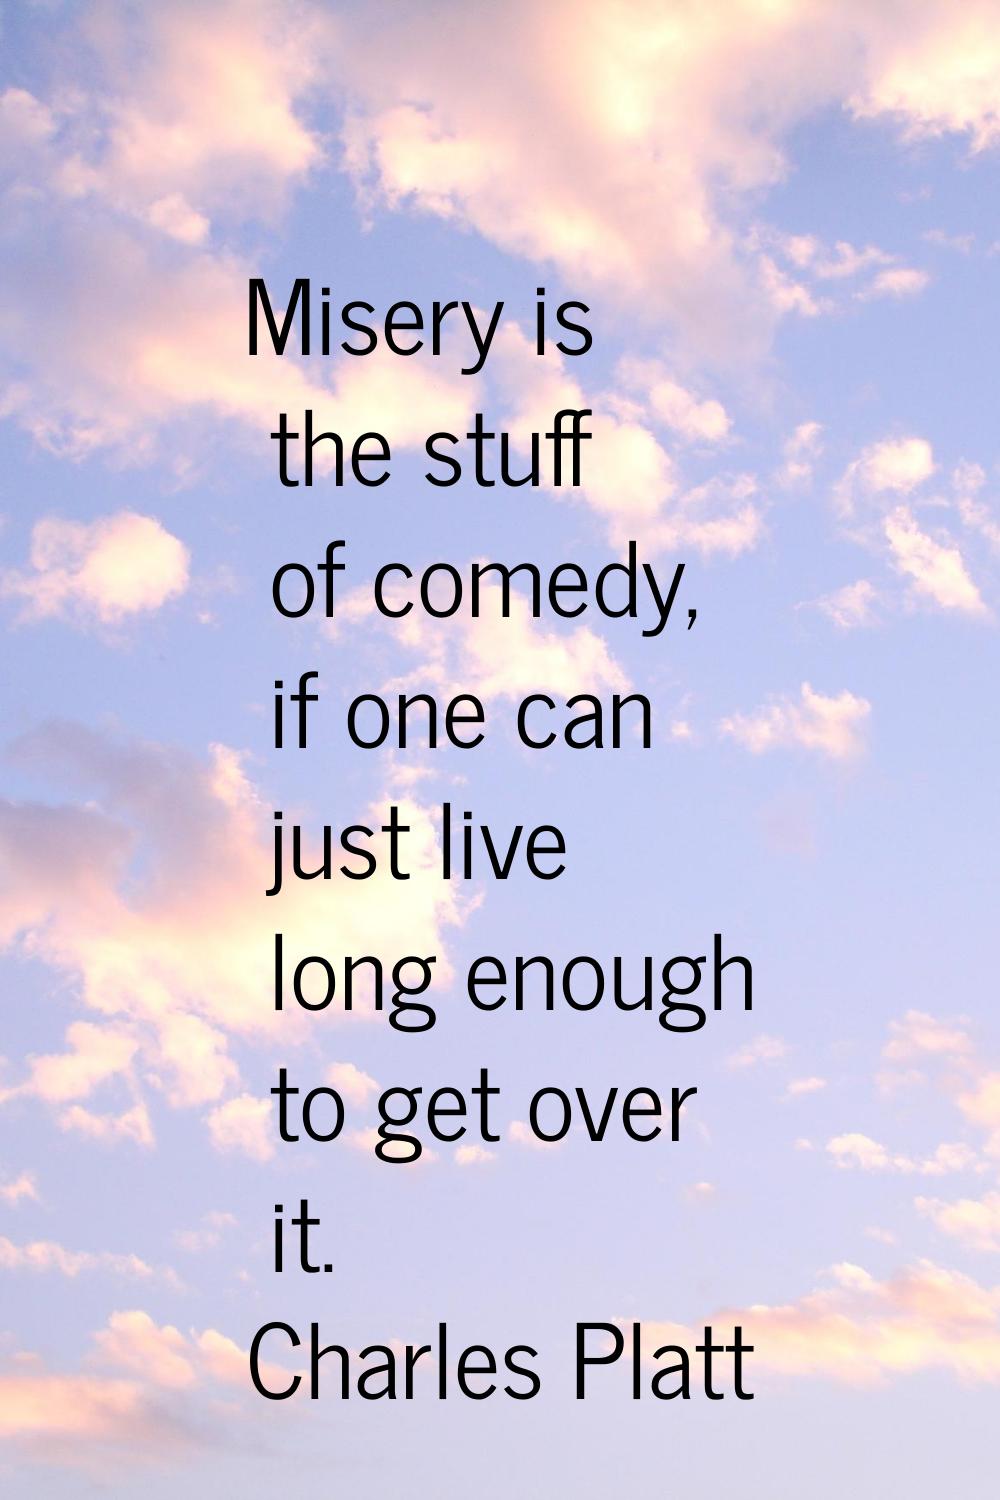 Misery is the stuff of comedy, if one can just live long enough to get over it.